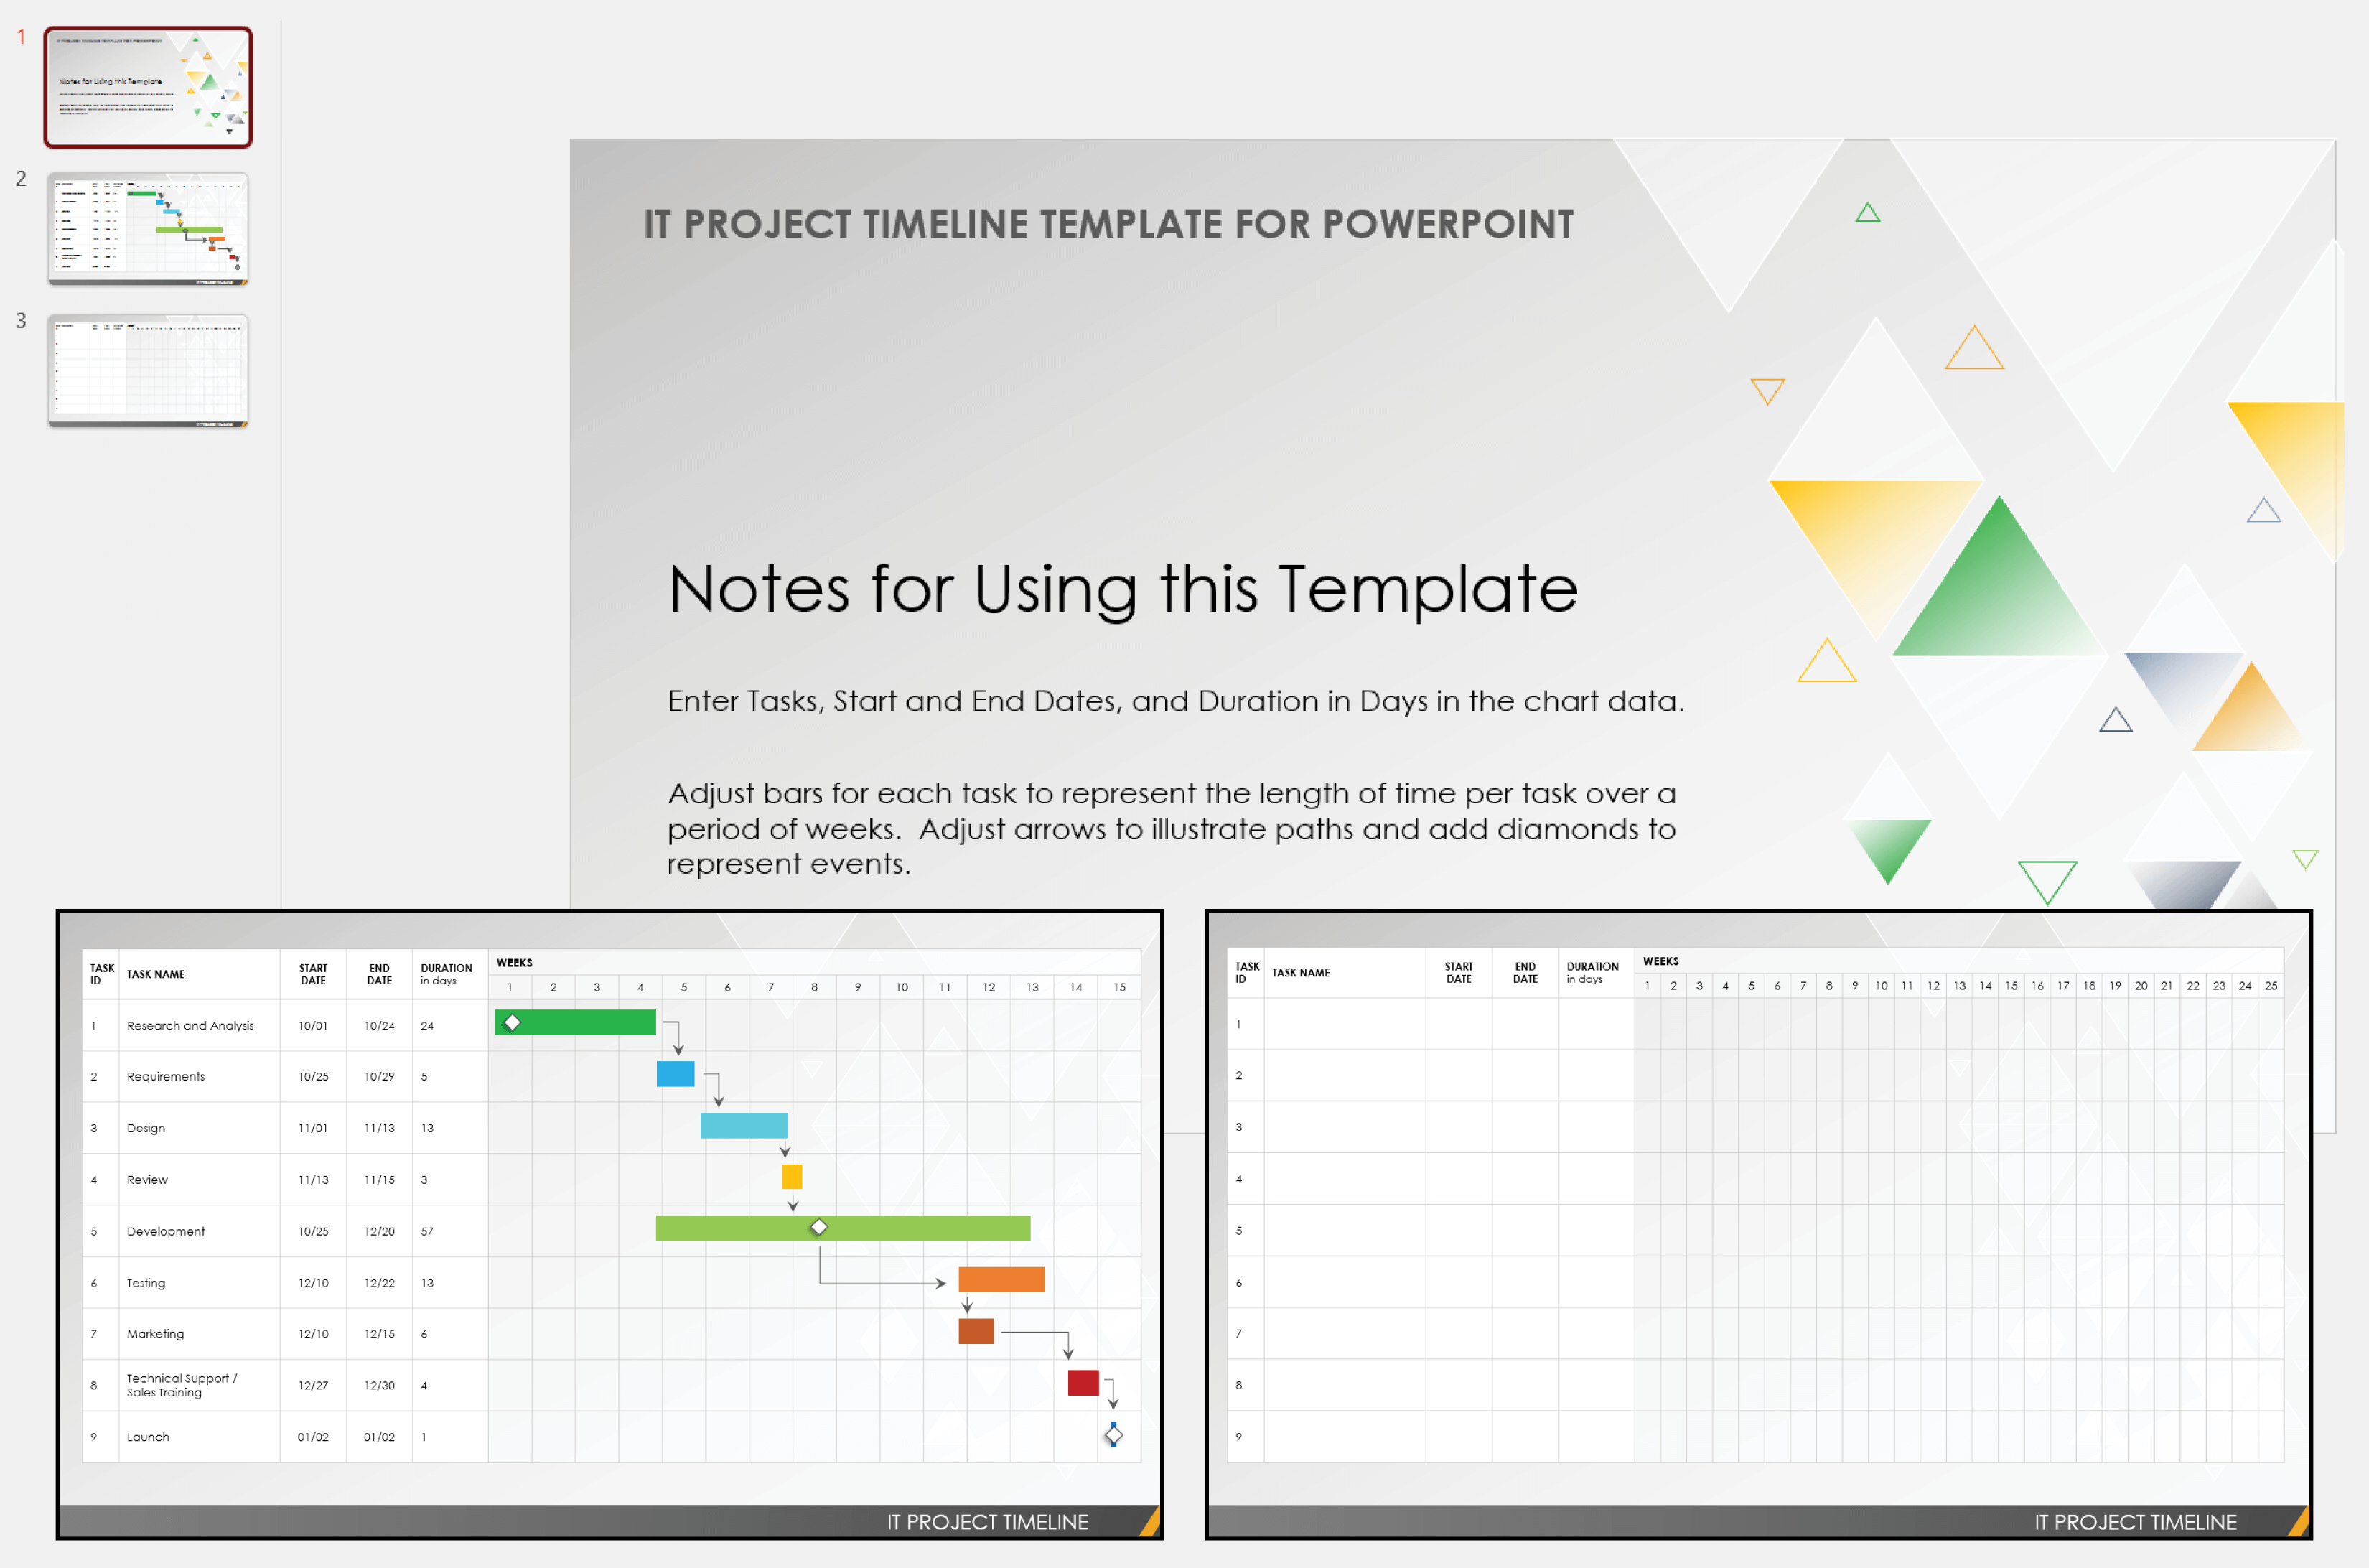 IT Project Timeline Template for PowerPoint